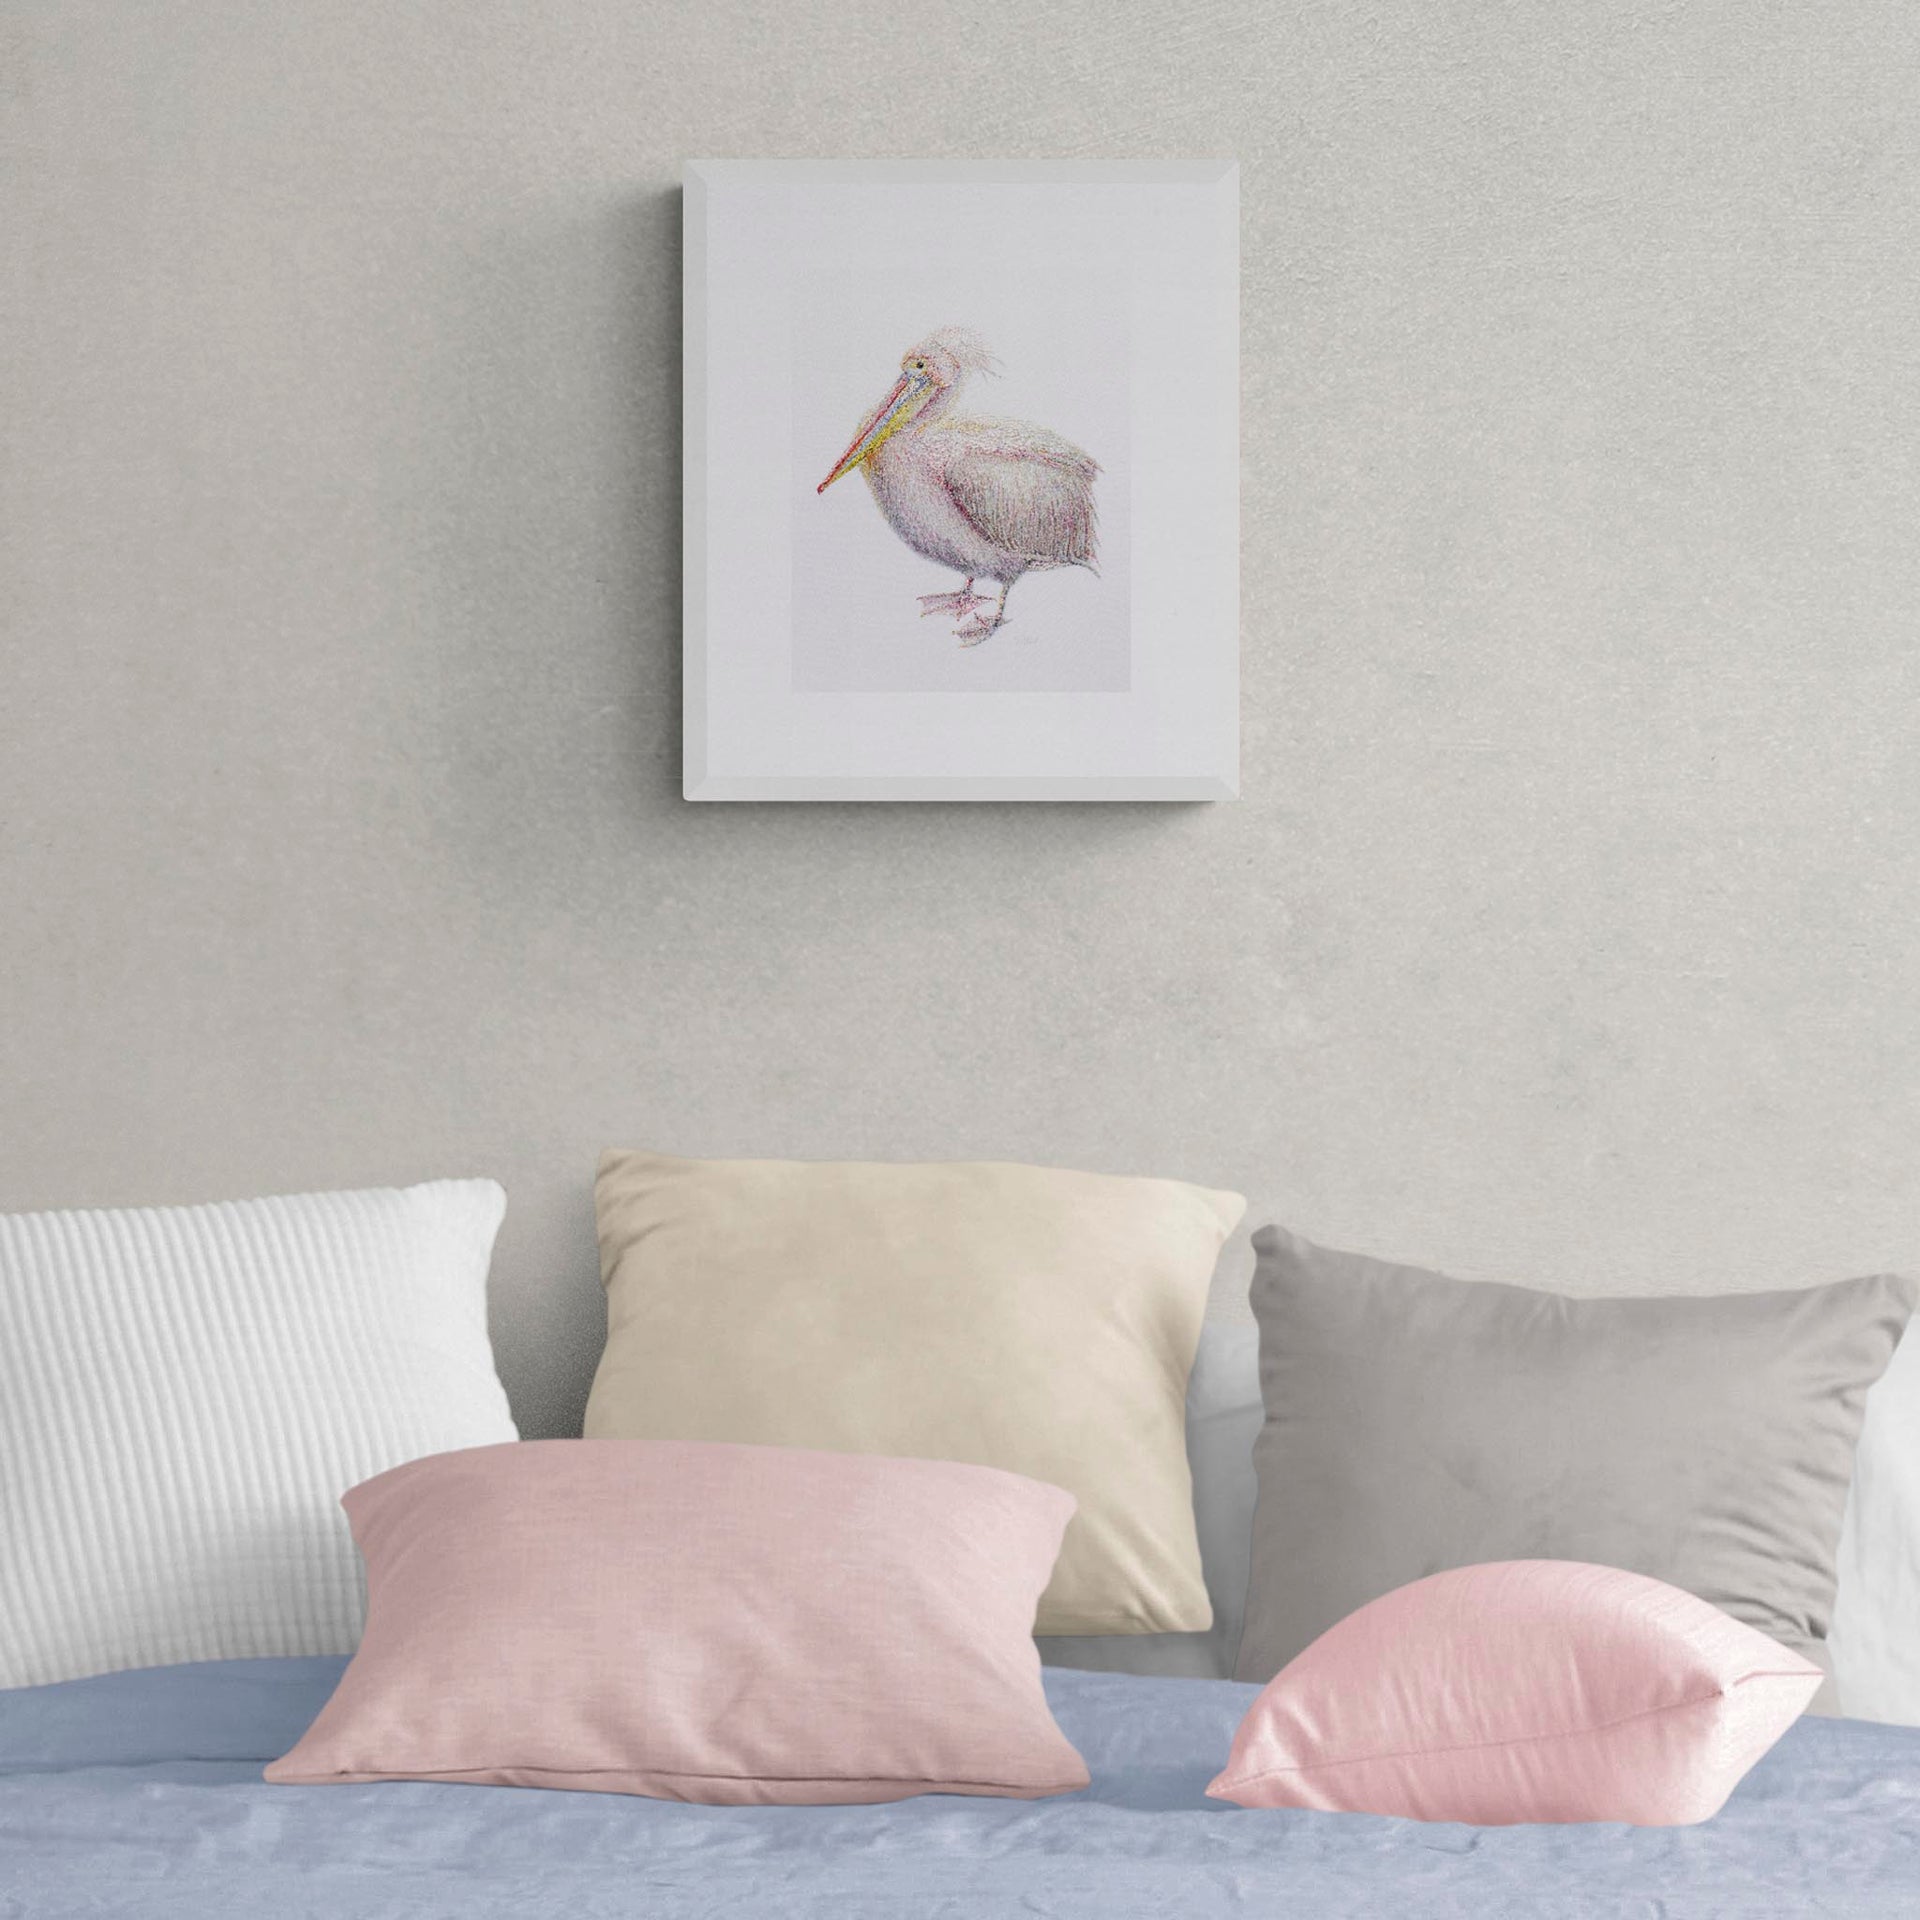 Pelican hand embroidered limited edition print in frame on the wall